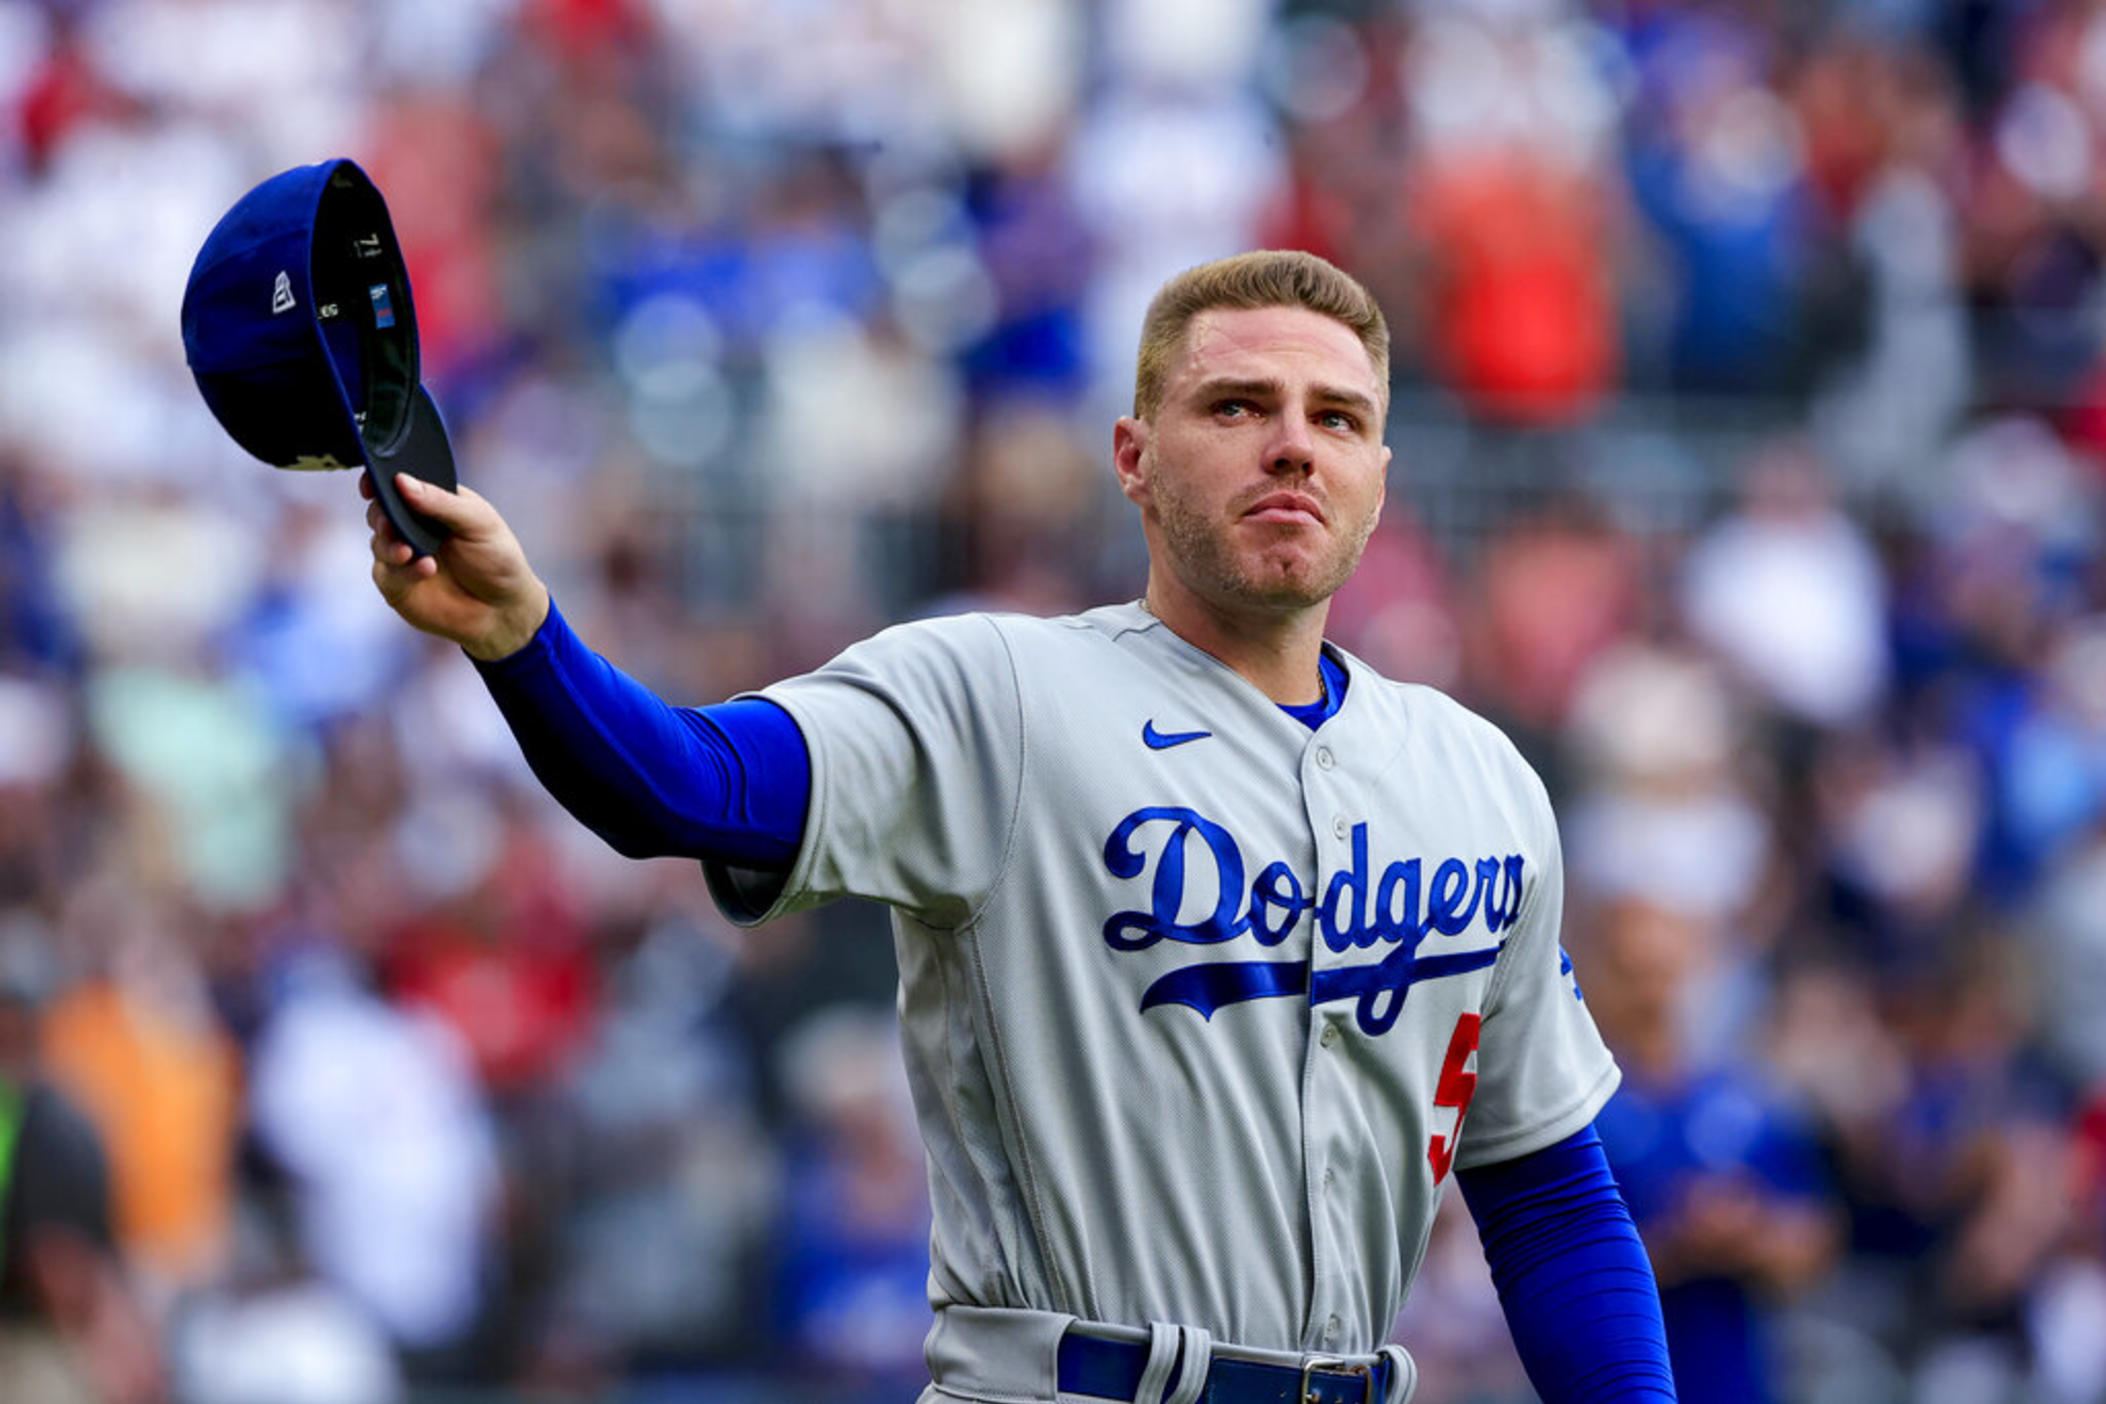 Los Angeles Dodgers first baseman Freddie Freeman walks to the field for the presentation of his World Series championship ring, before the team's baseball game against the Atlanta Braves on Friday, June 24, 2022 in Atlanta. 